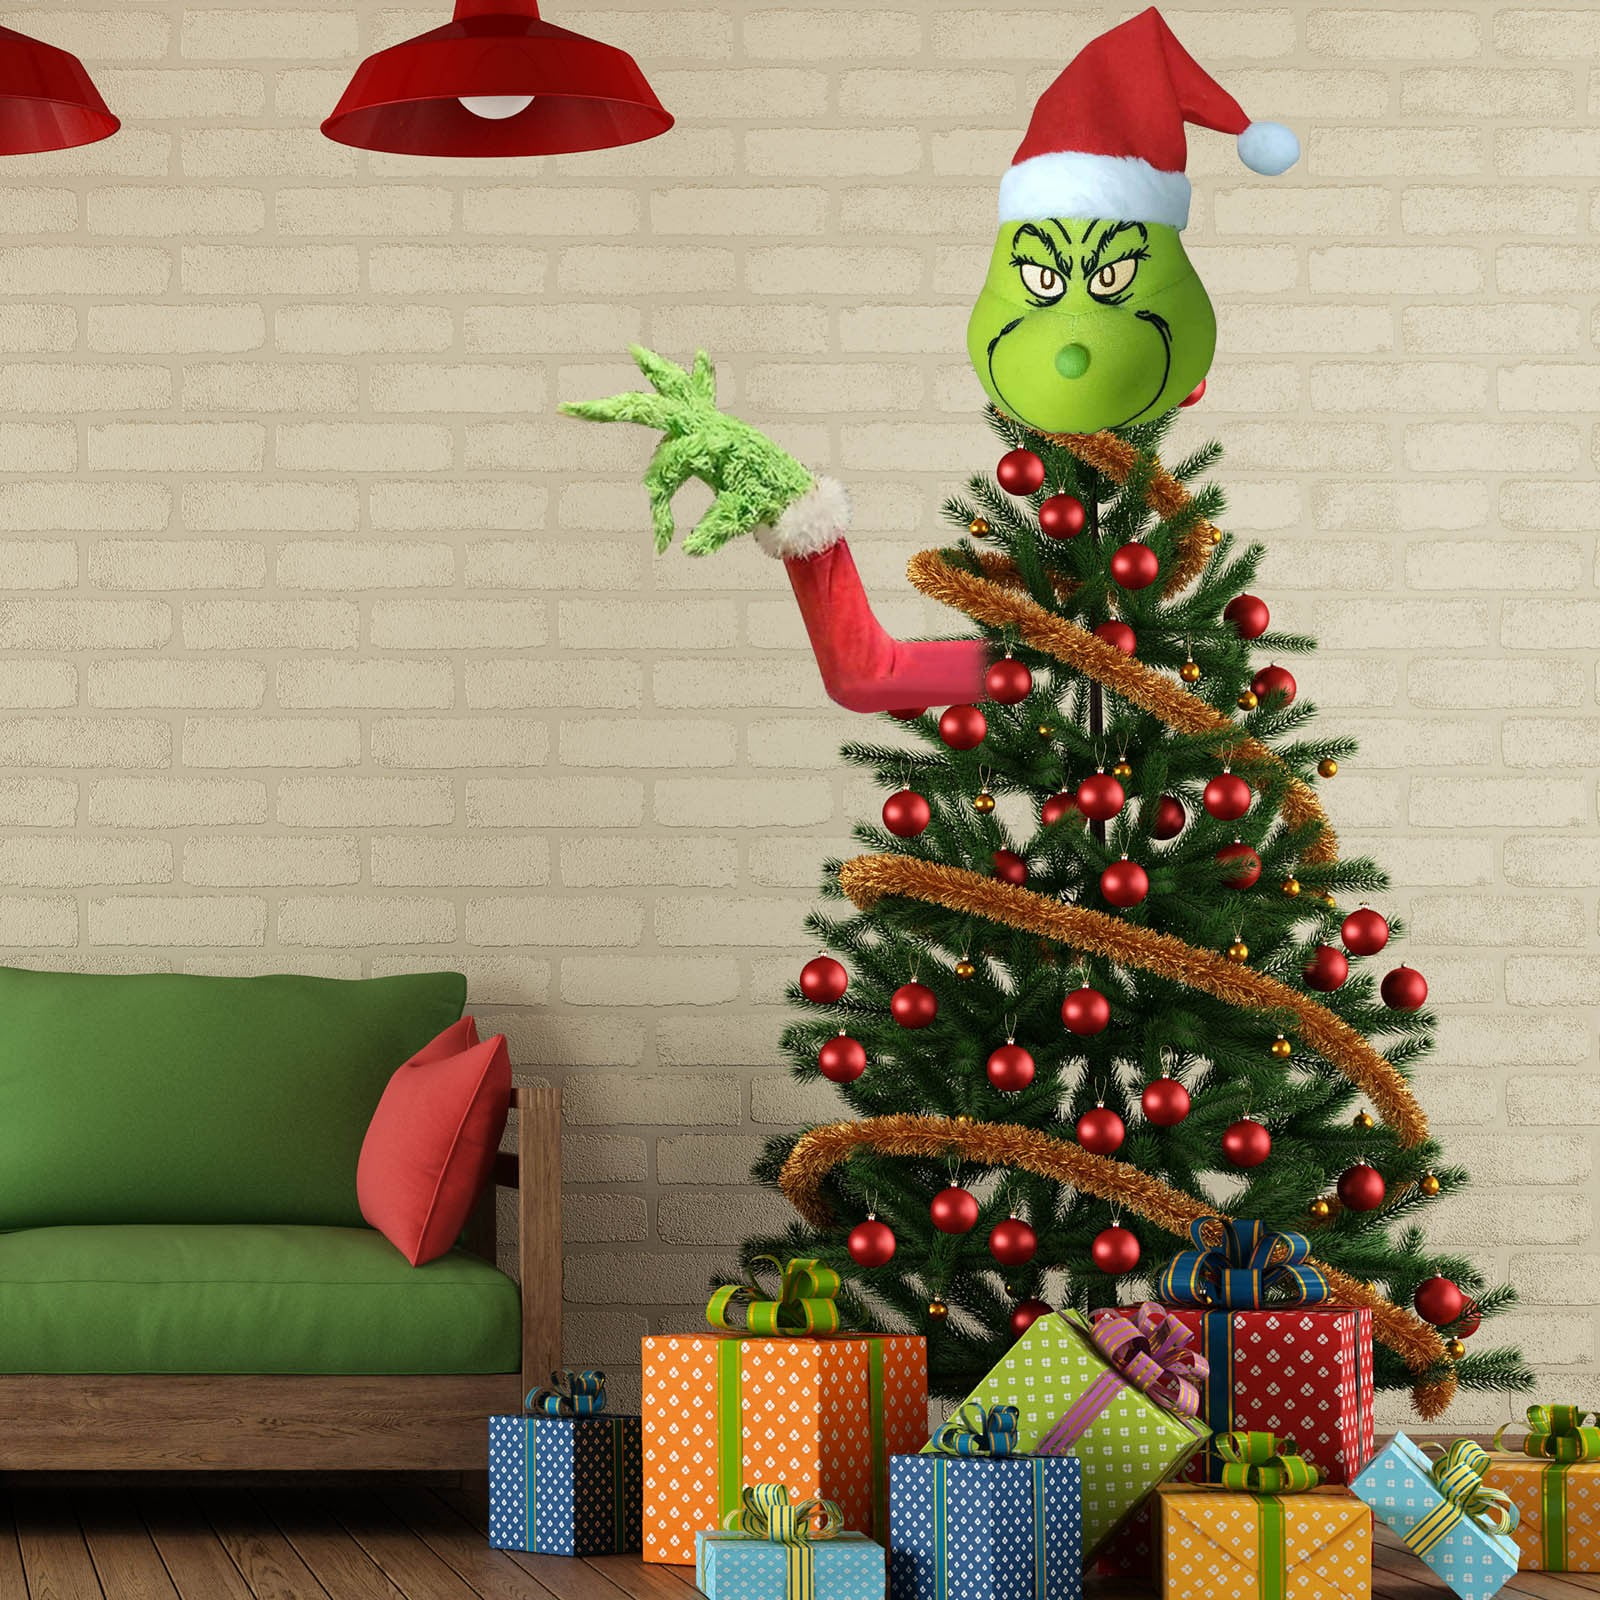 Grinch Christmas Decorations Furry Green Grinch Arm Ornament Holder Tree Sets 